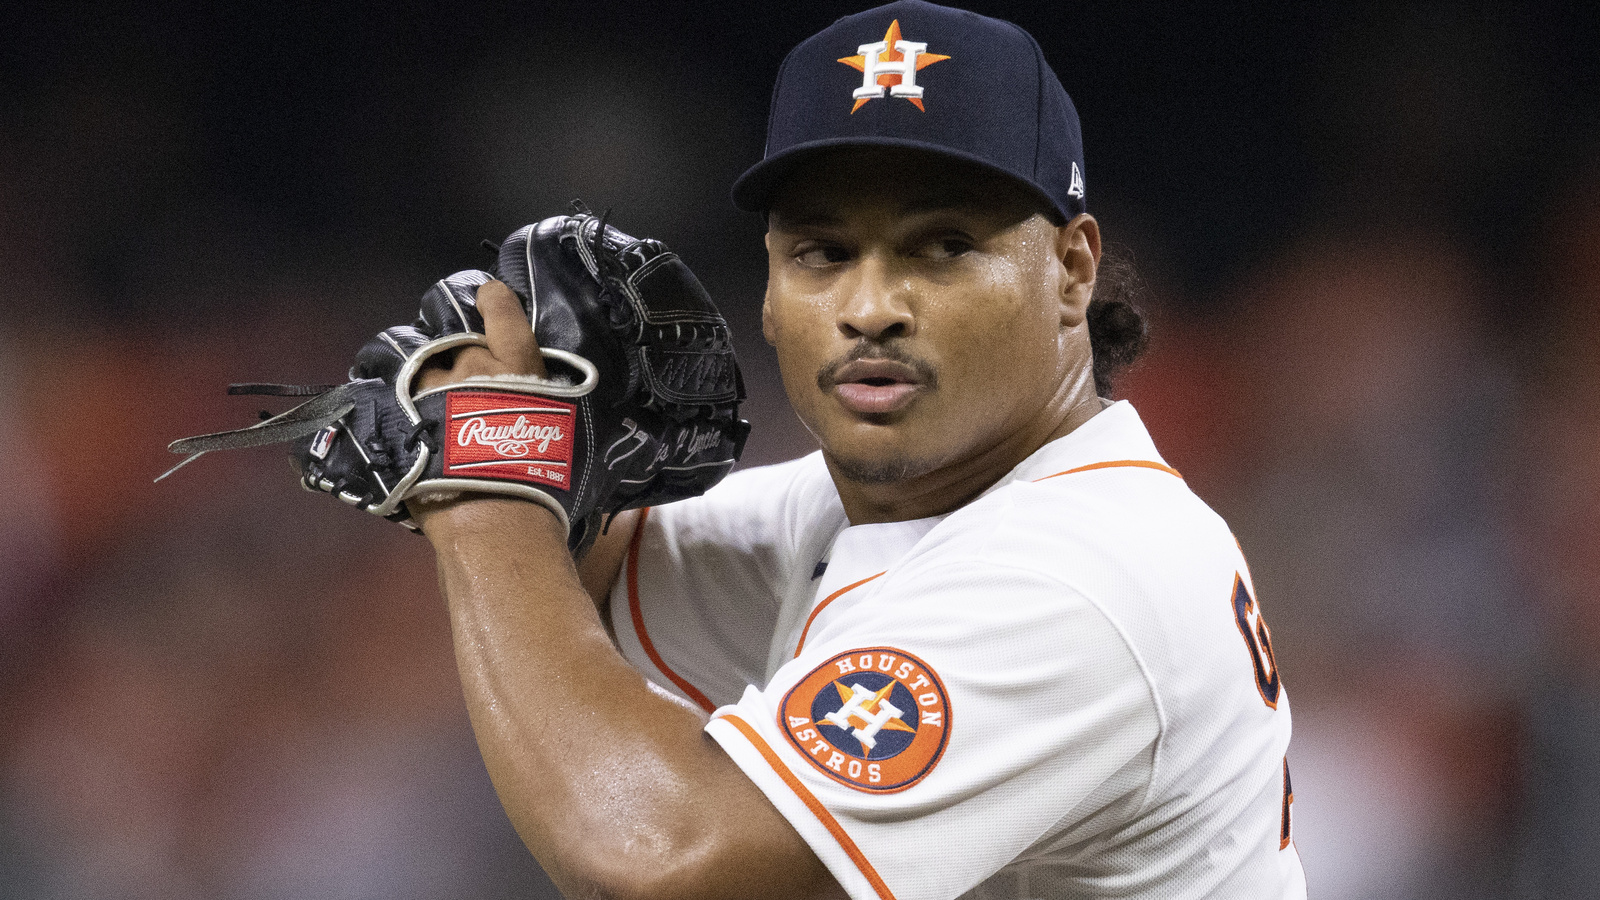 Astros pitcher Luis Garcia's rock the baby windup now banned